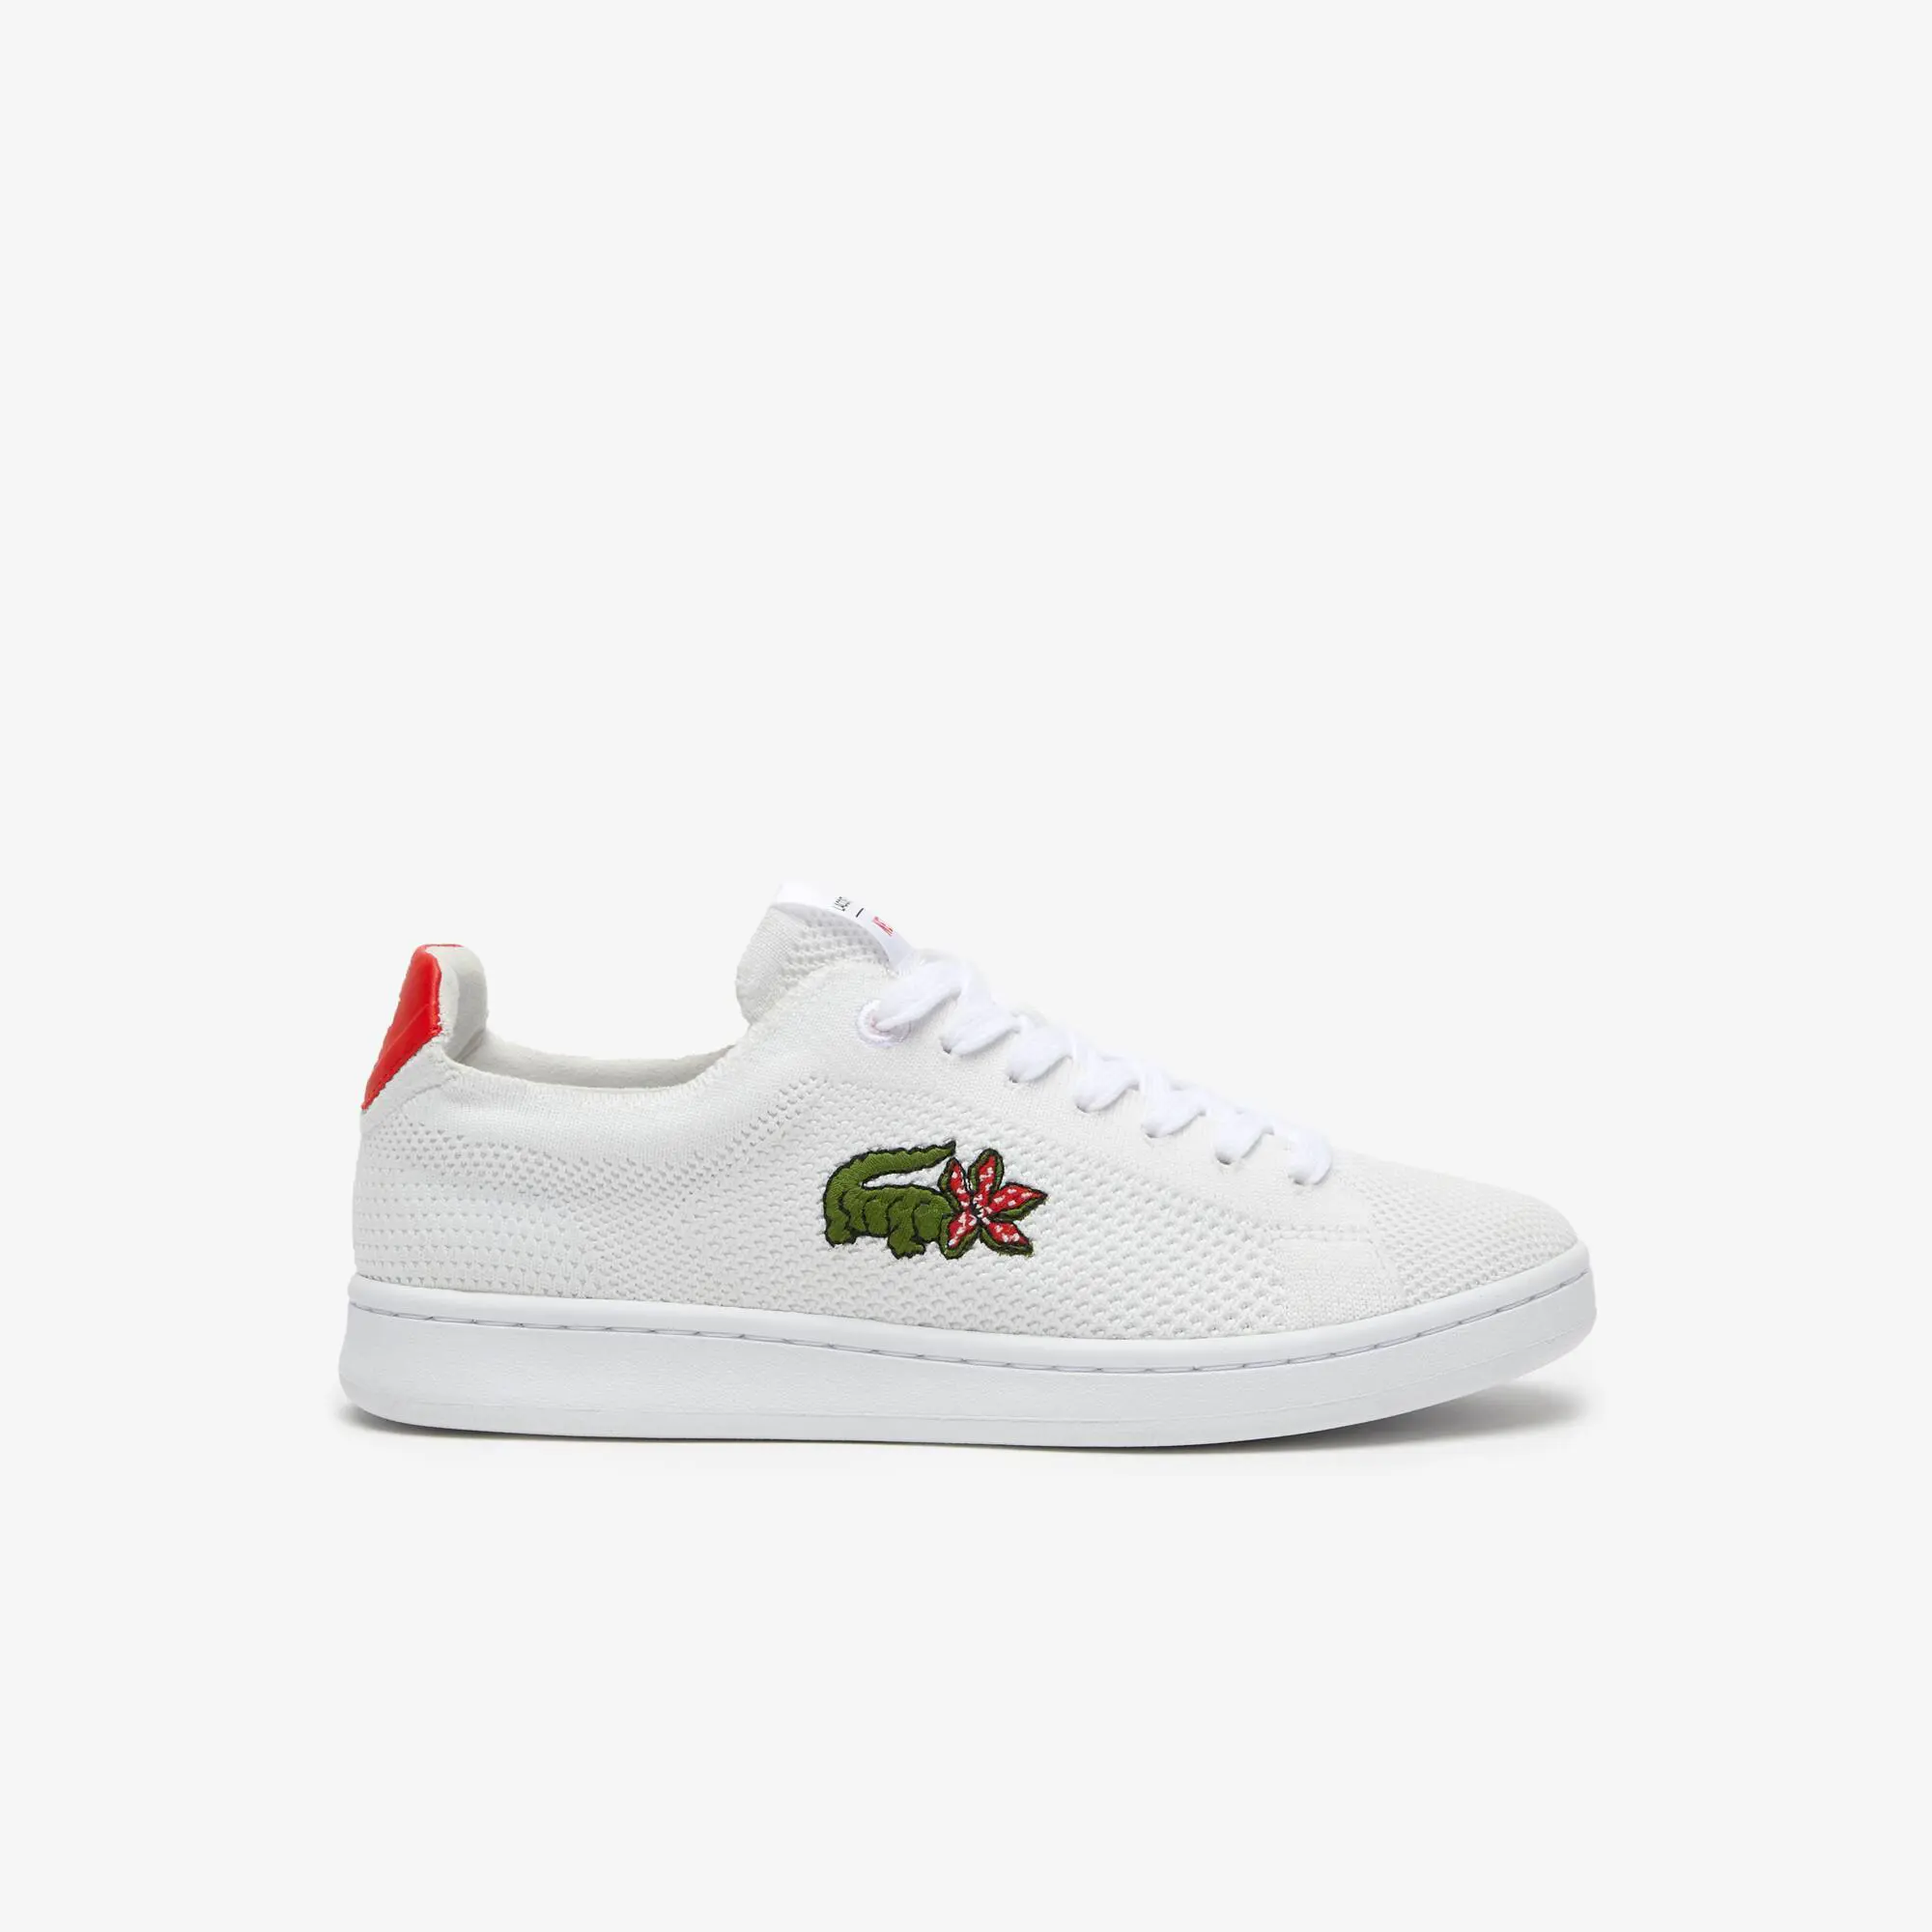 Lacoste Women's Lacoste x Netflix Stranger Things Carnaby Piquée Textile Trainers. 1